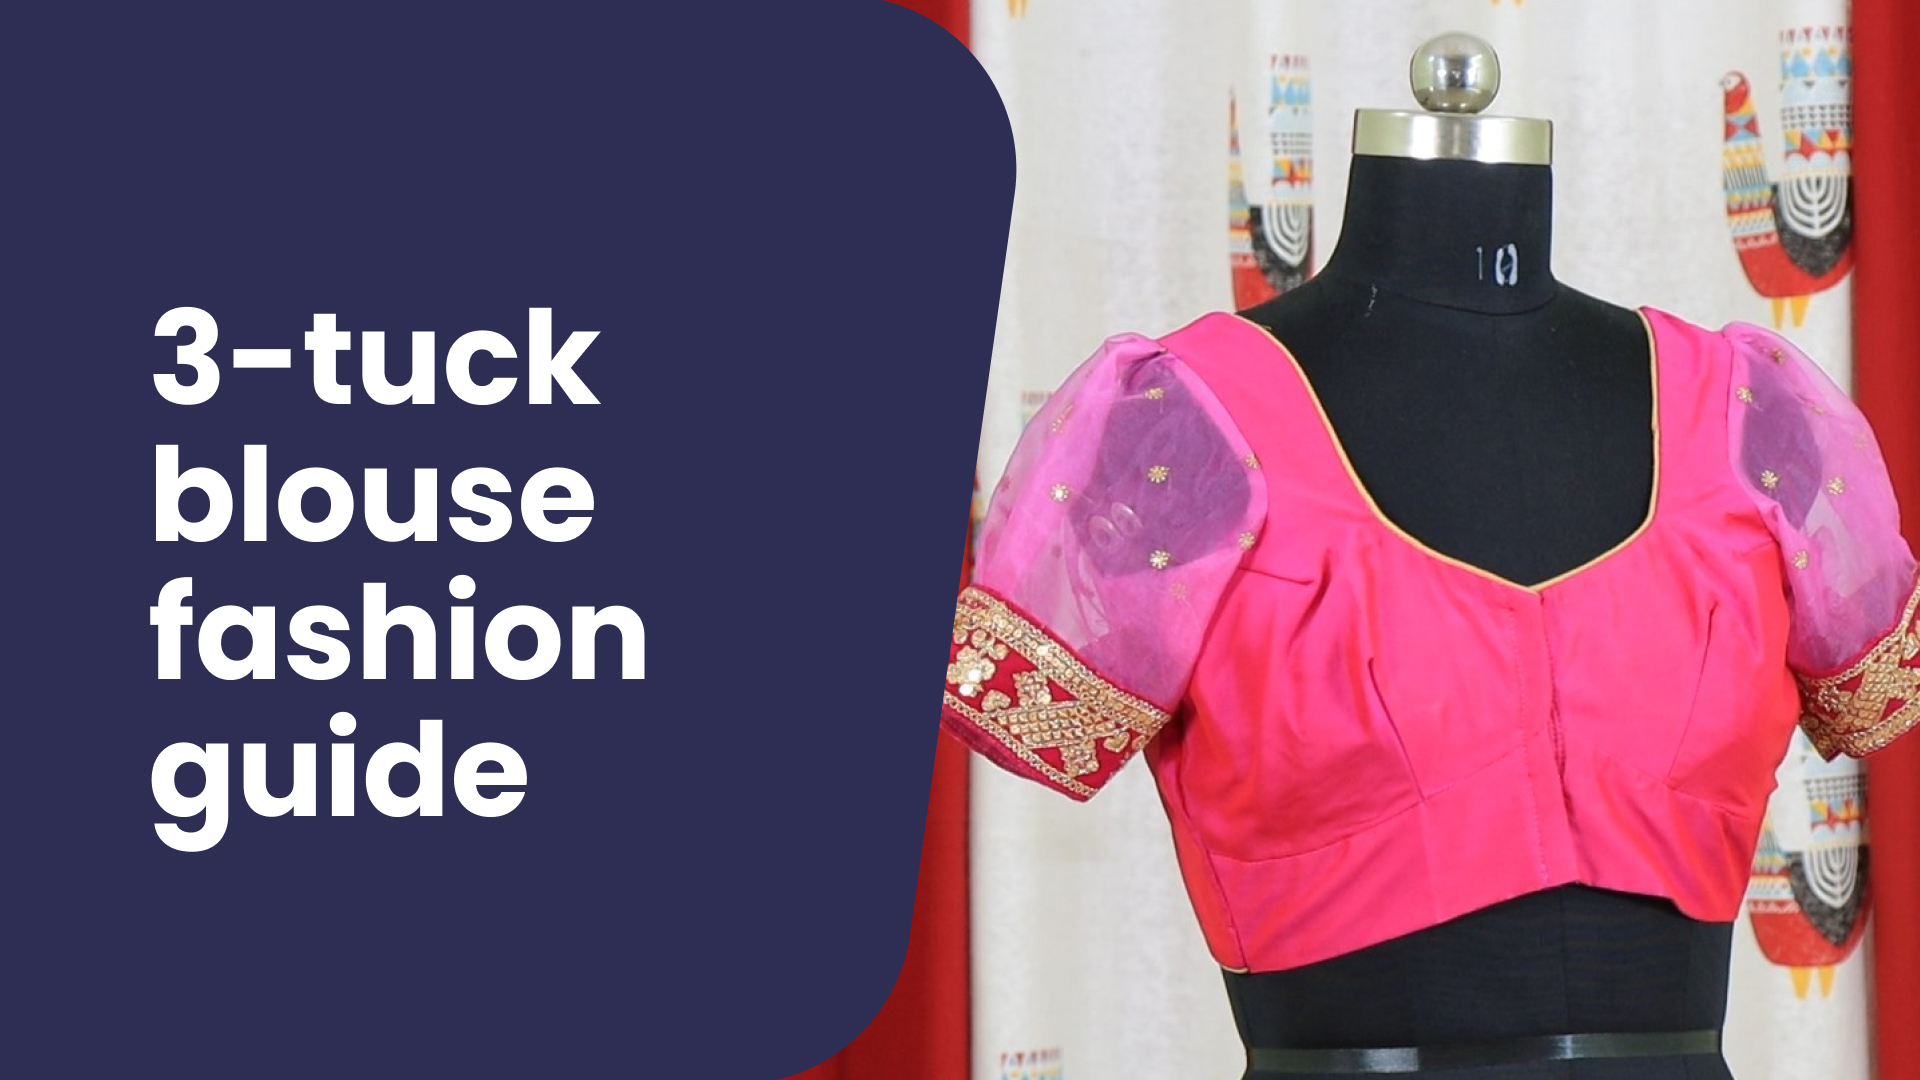 Course Trailer: Stitch a 3-Tuck Blouse with a Belt. Watch to know more.